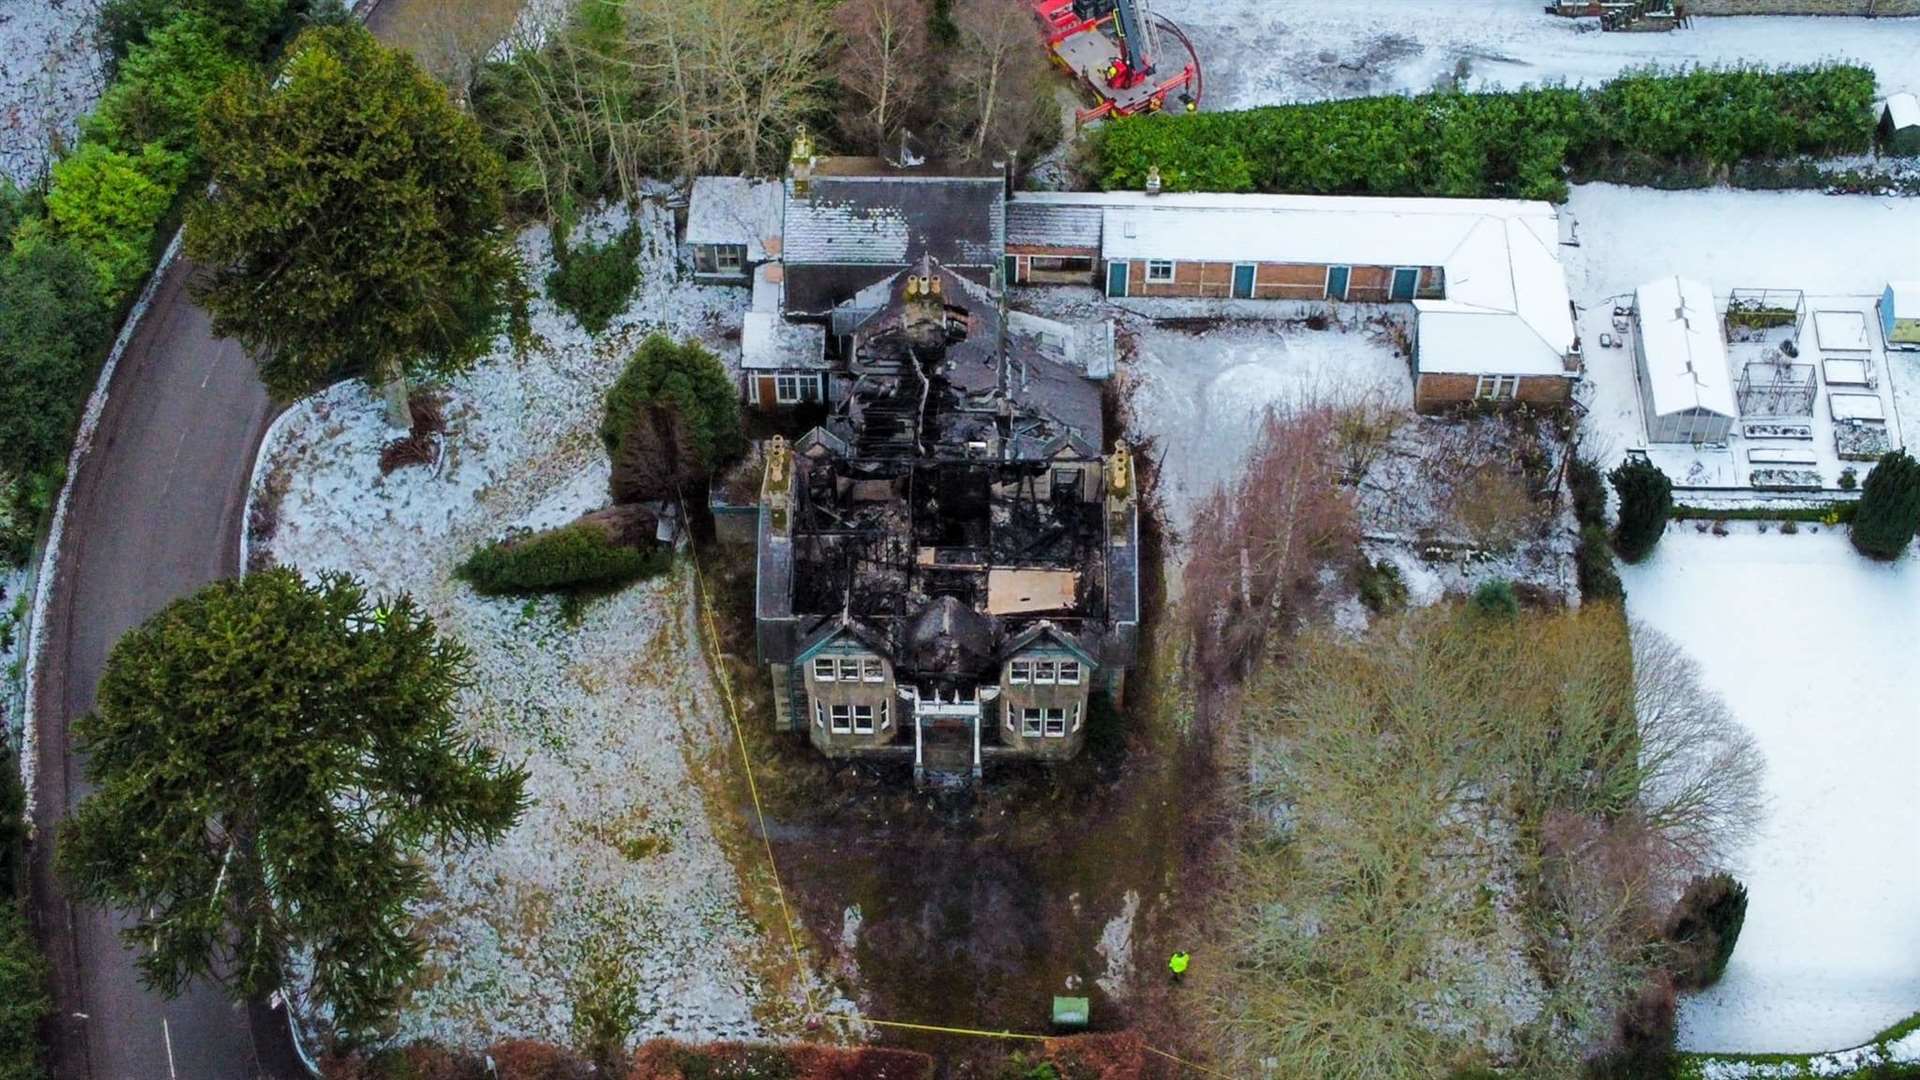 Strathpeffer building which caught fire. Pic: George Finlayson.